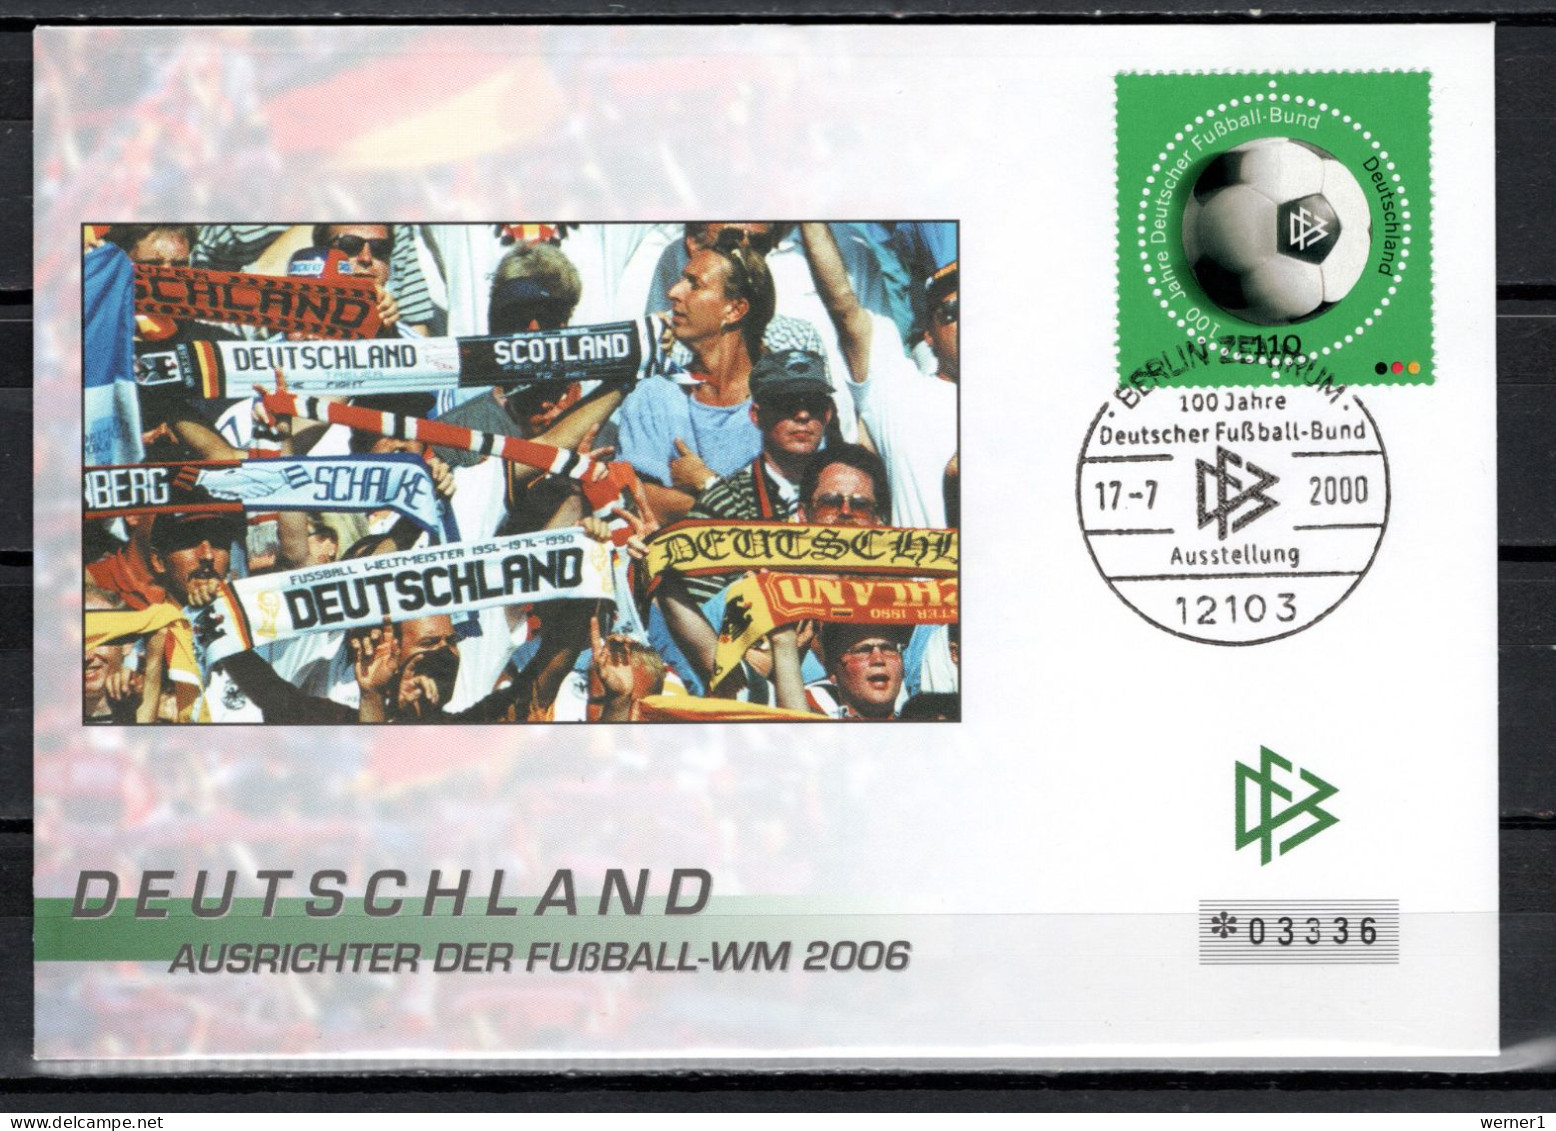 Germany 2000 Football Soccer World Cup Commemorative Cover - 2006 – Alemania